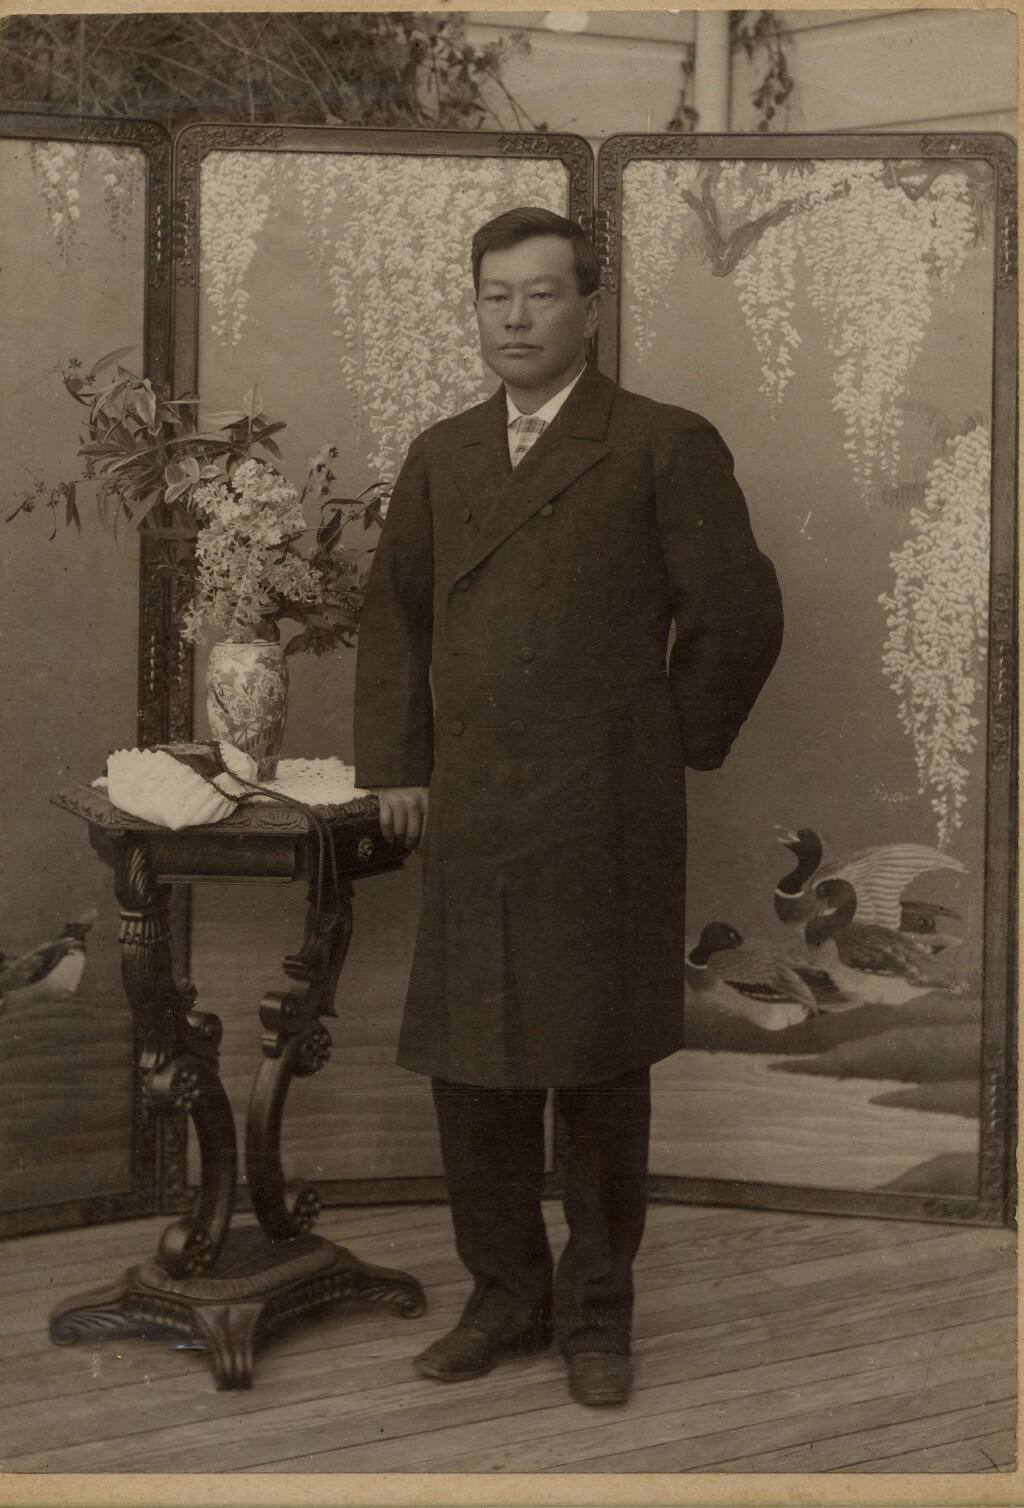 Although supported locally and by the community residents, in 1892 Harris left Fountaingrove, and deeded the property to his adopted son, Kanaye Nagasawa. (Courtesy of the Sonoma County Museum)